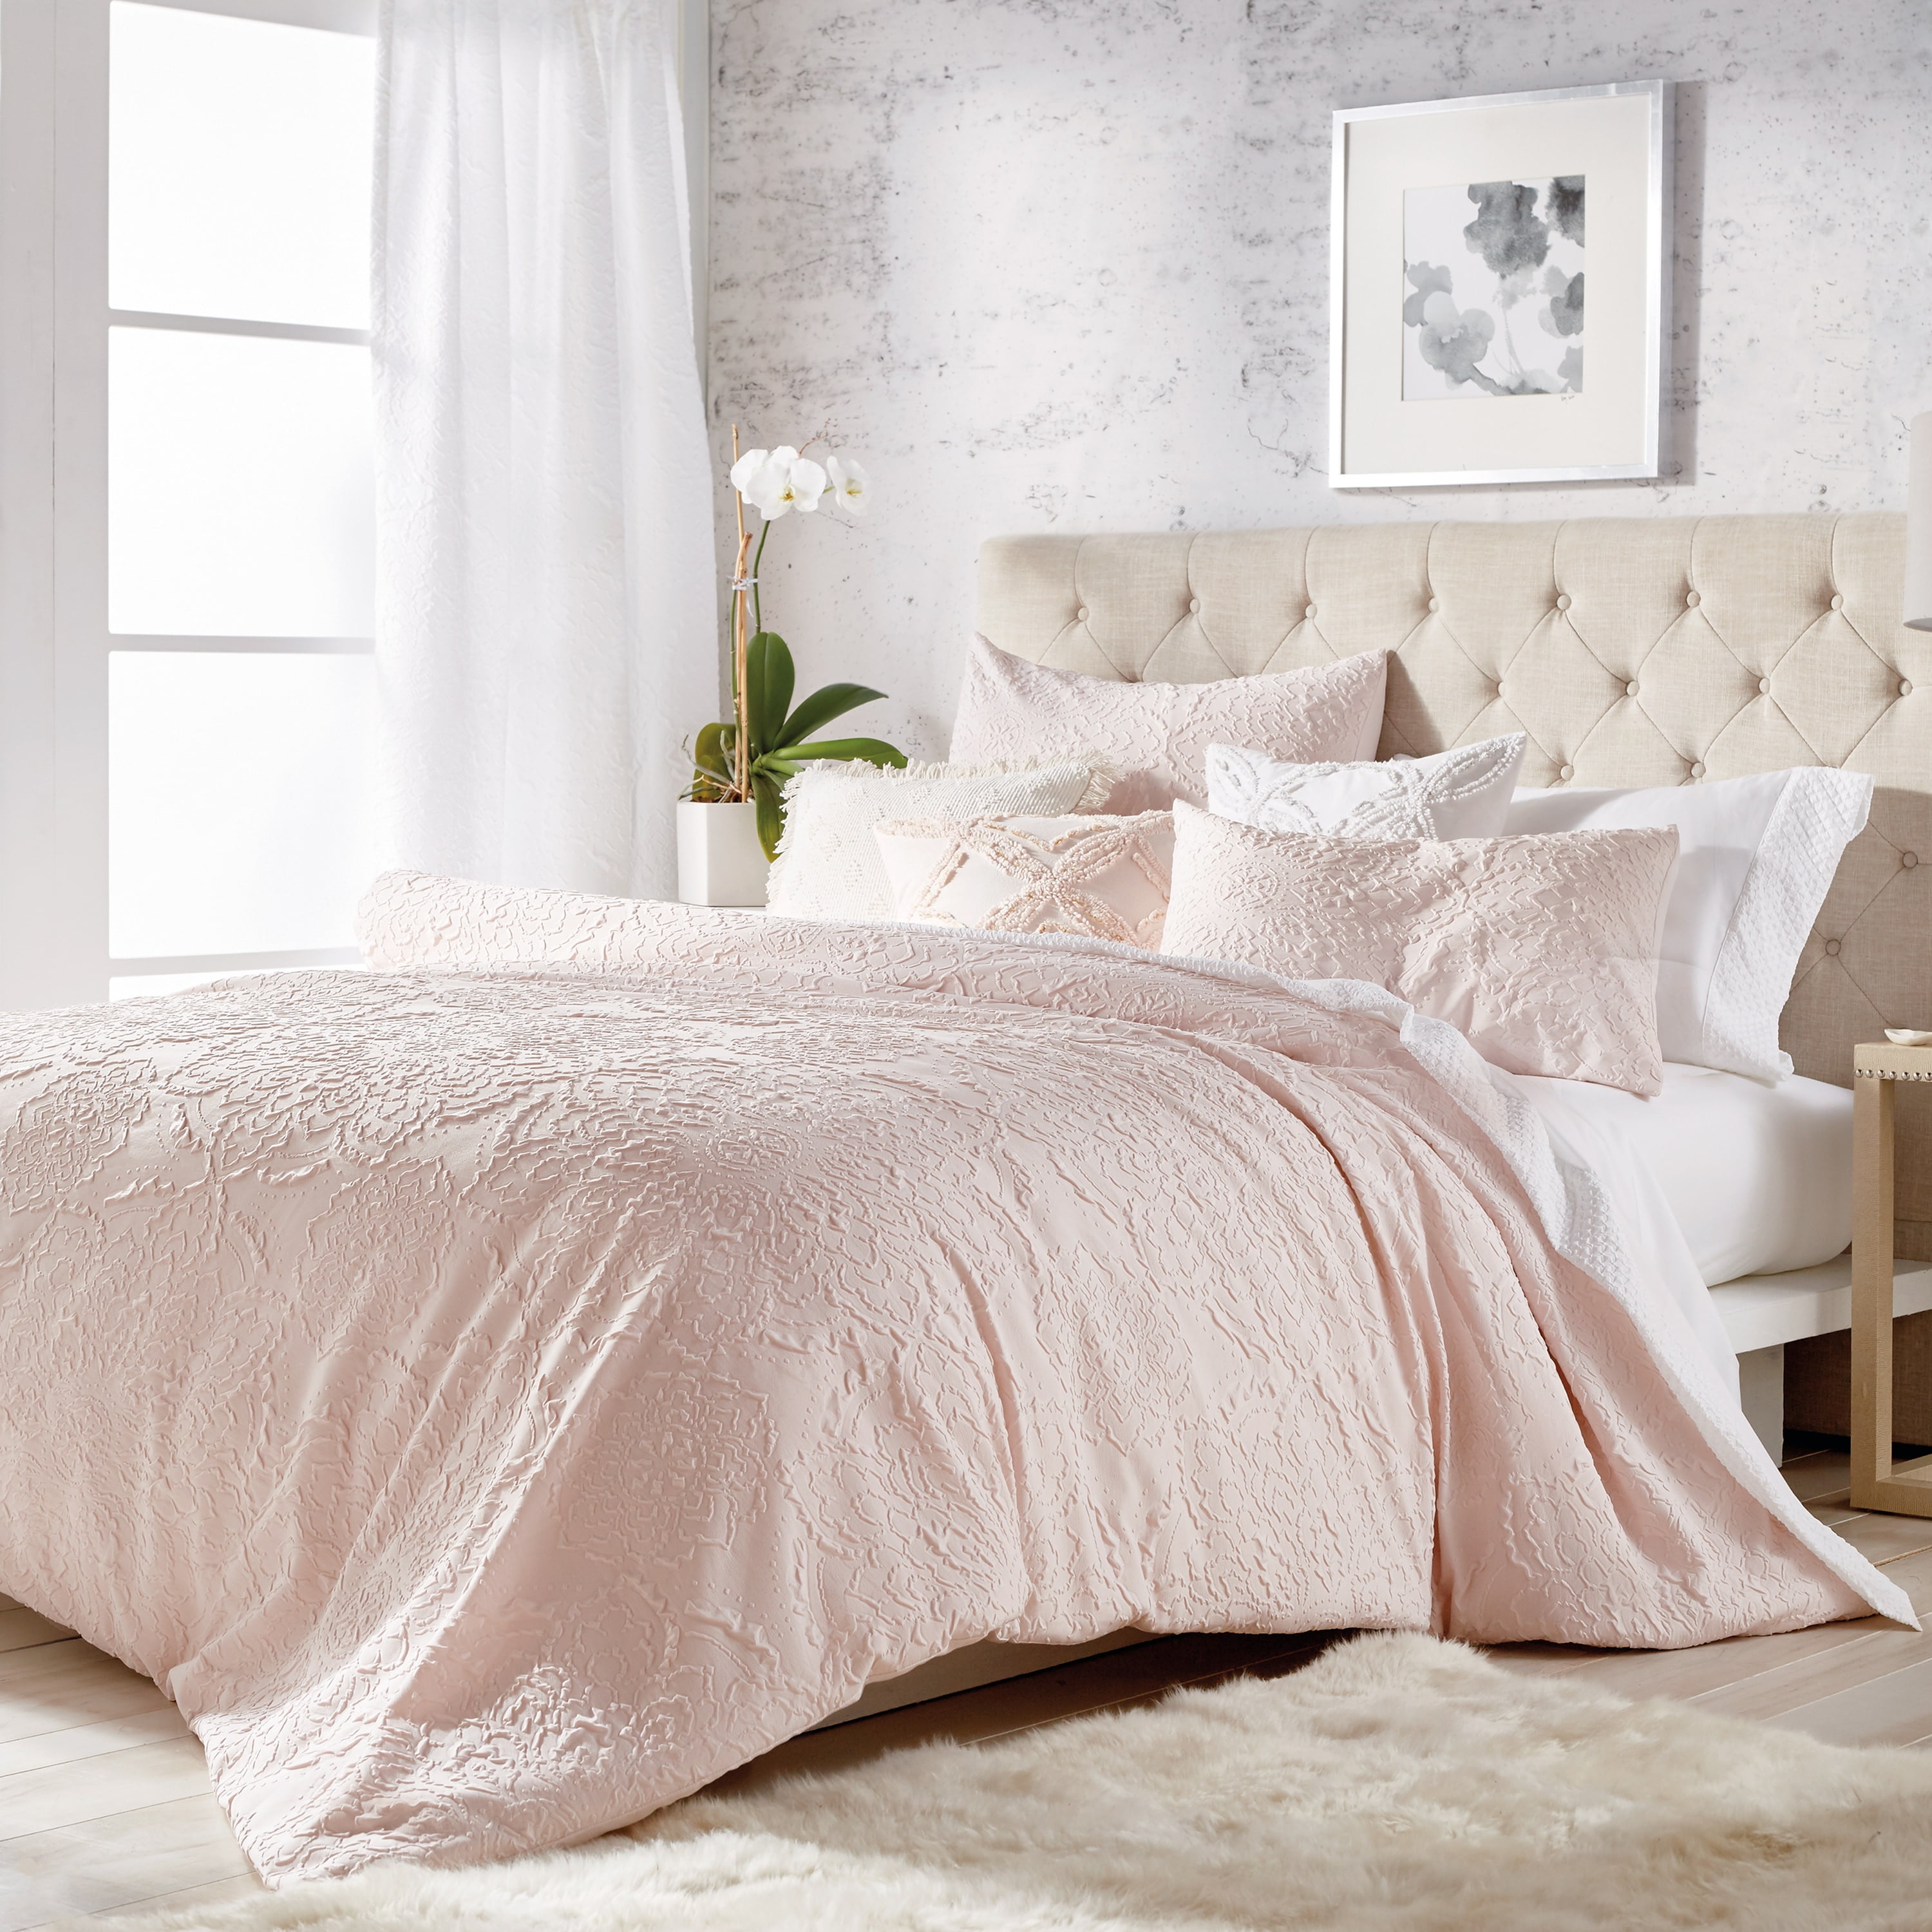 Microsculpt Solid Textured Medallion, Solid Textured Duvet Covers